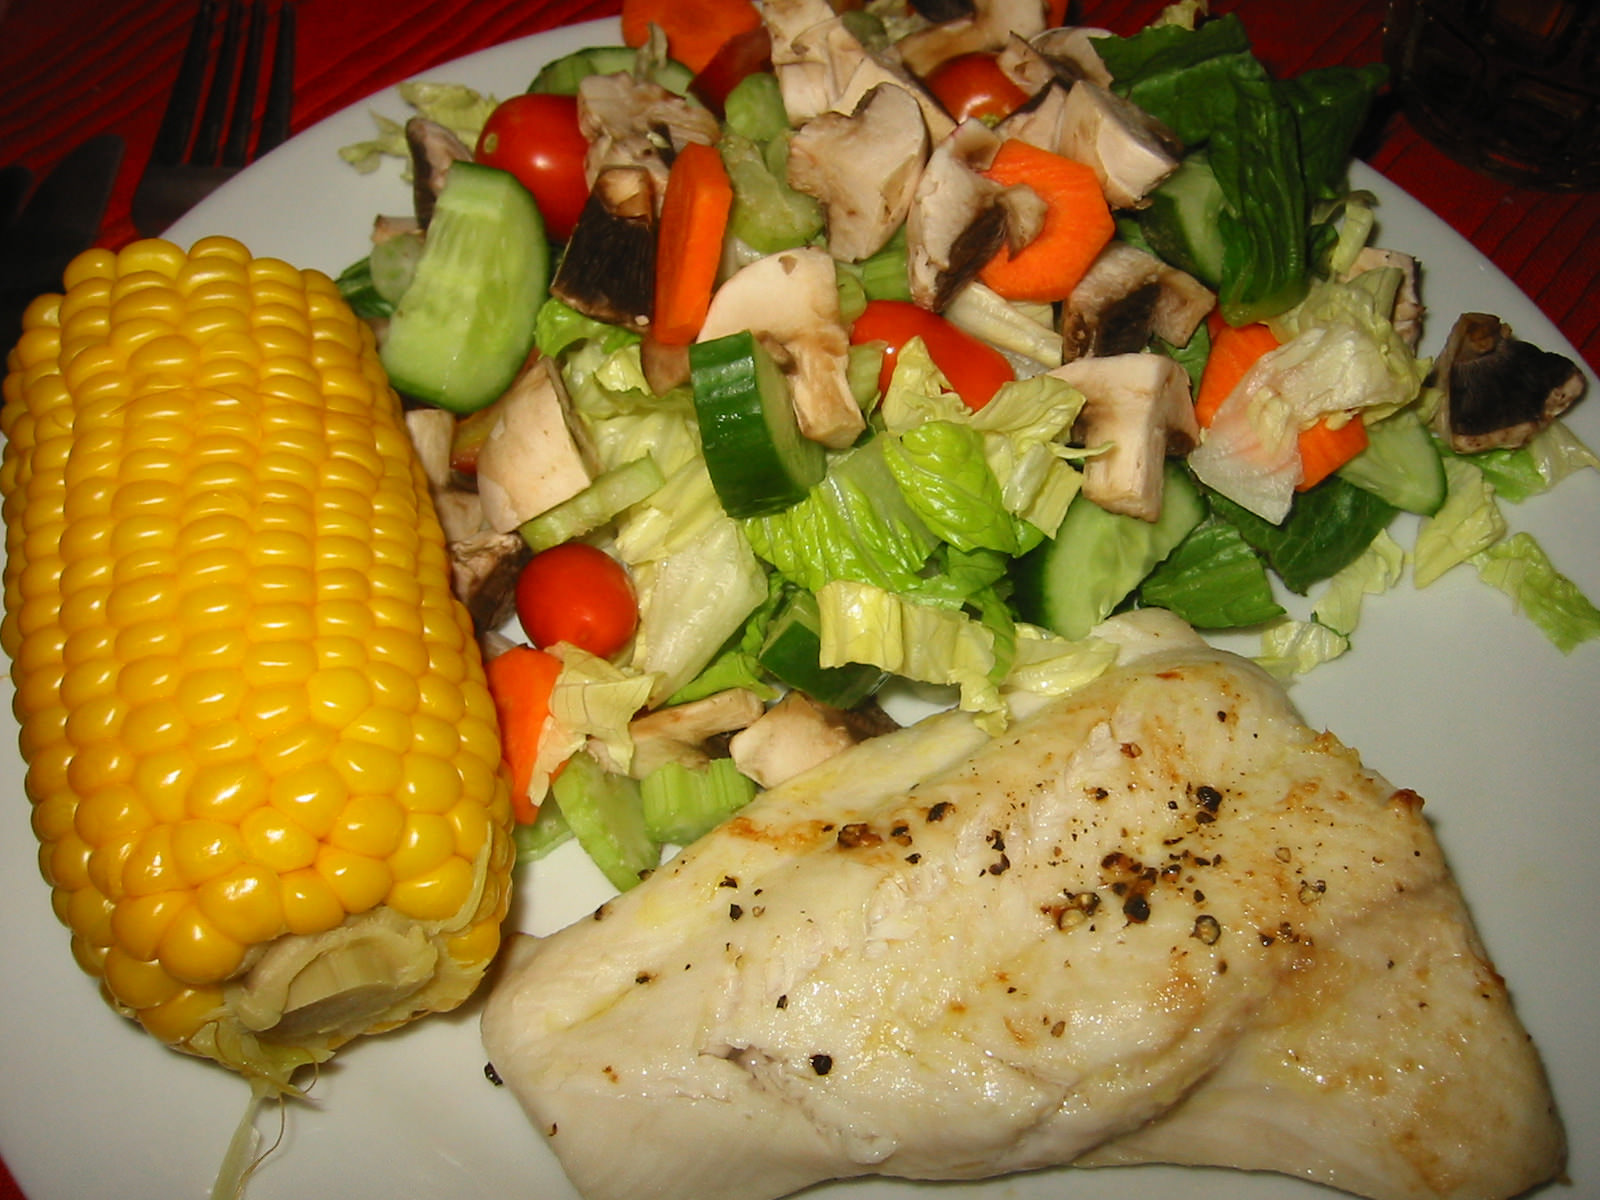 Grilled shark, salad and corn